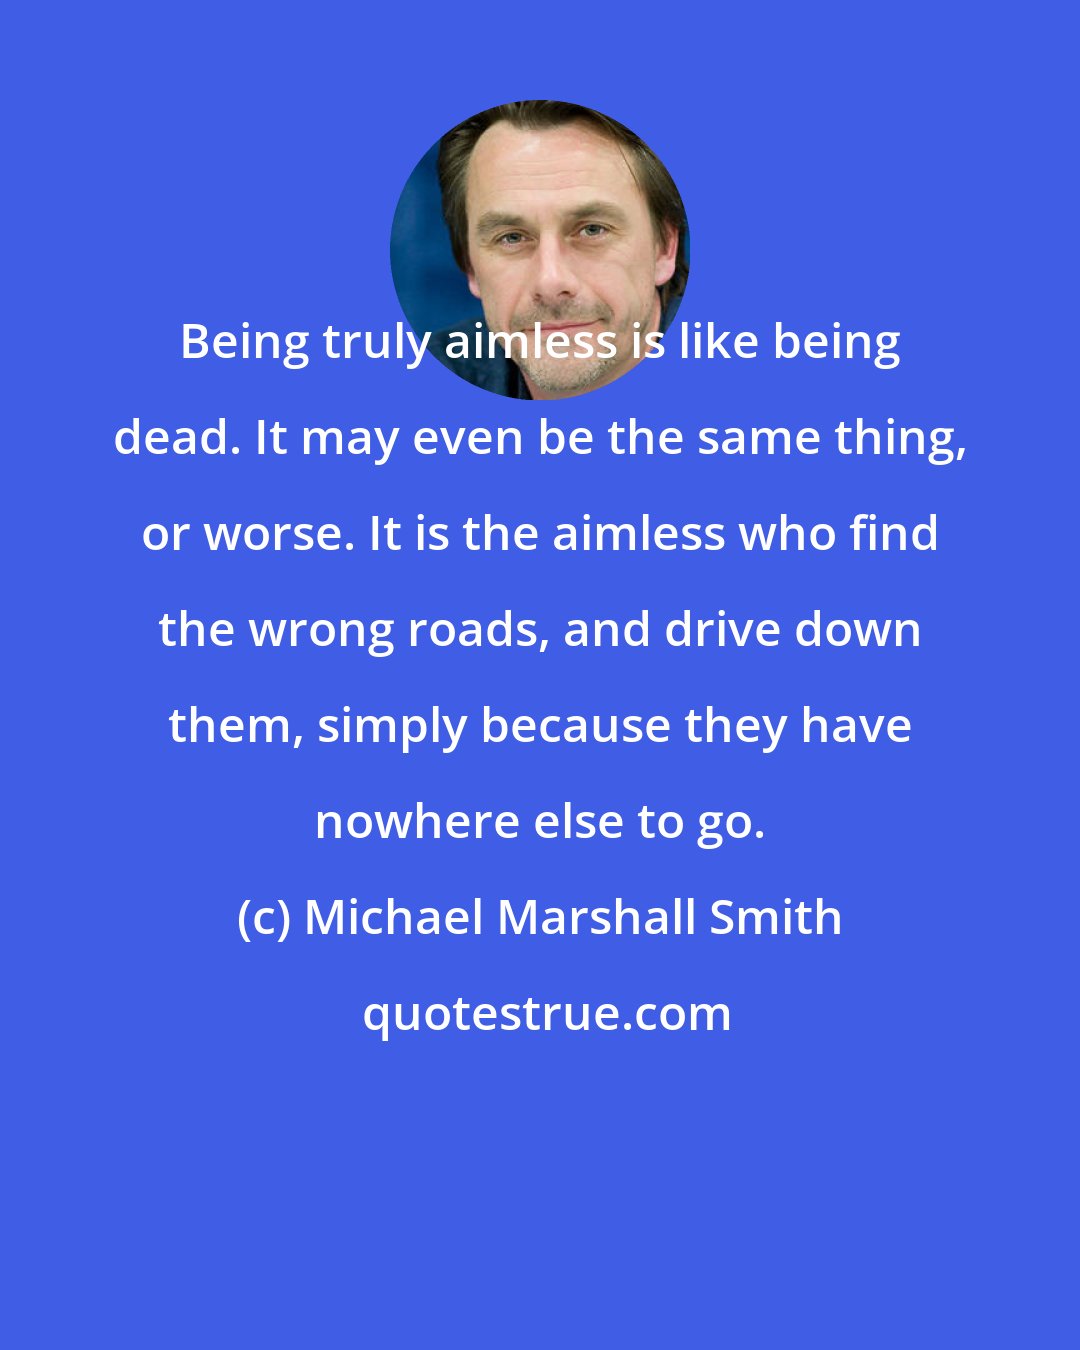 Michael Marshall Smith: Being truly aimless is like being dead. It may even be the same thing, or worse. It is the aimless who find the wrong roads, and drive down them, simply because they have nowhere else to go.